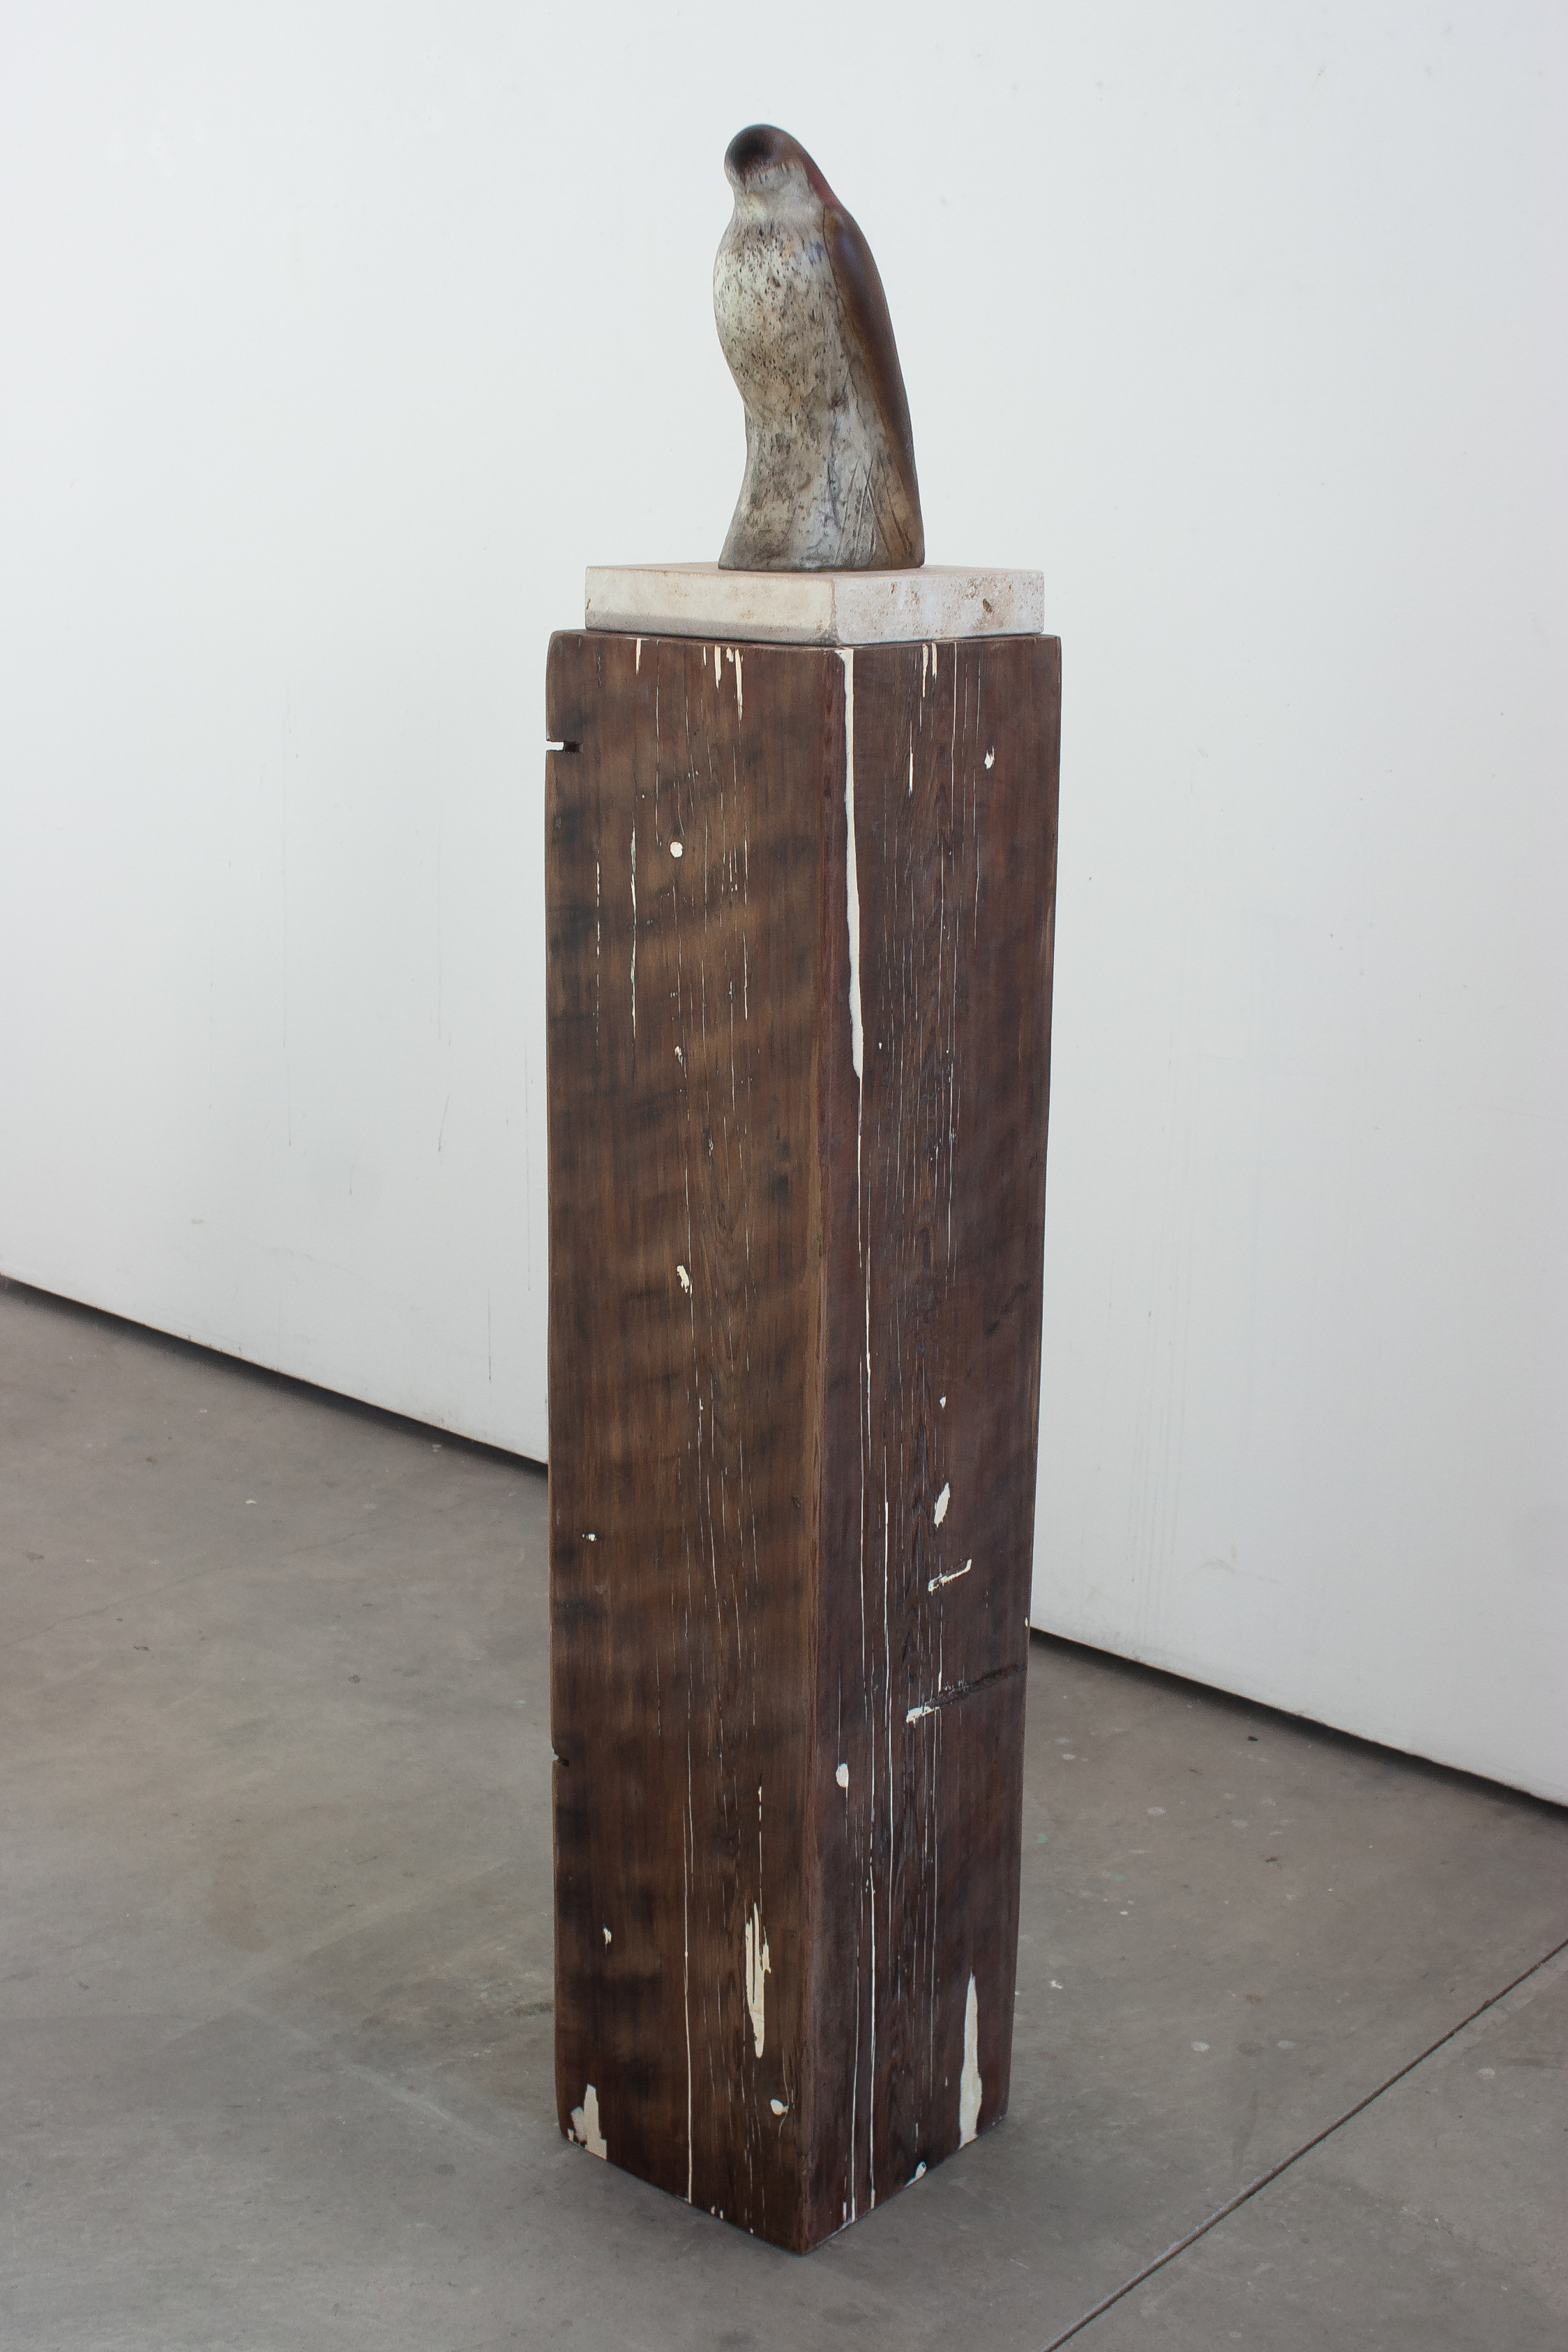  “Lola on Redwood,” 2014 Handblown glass, limestone, redwood with marble inlay 67 x 11.5 x x 12 inches 